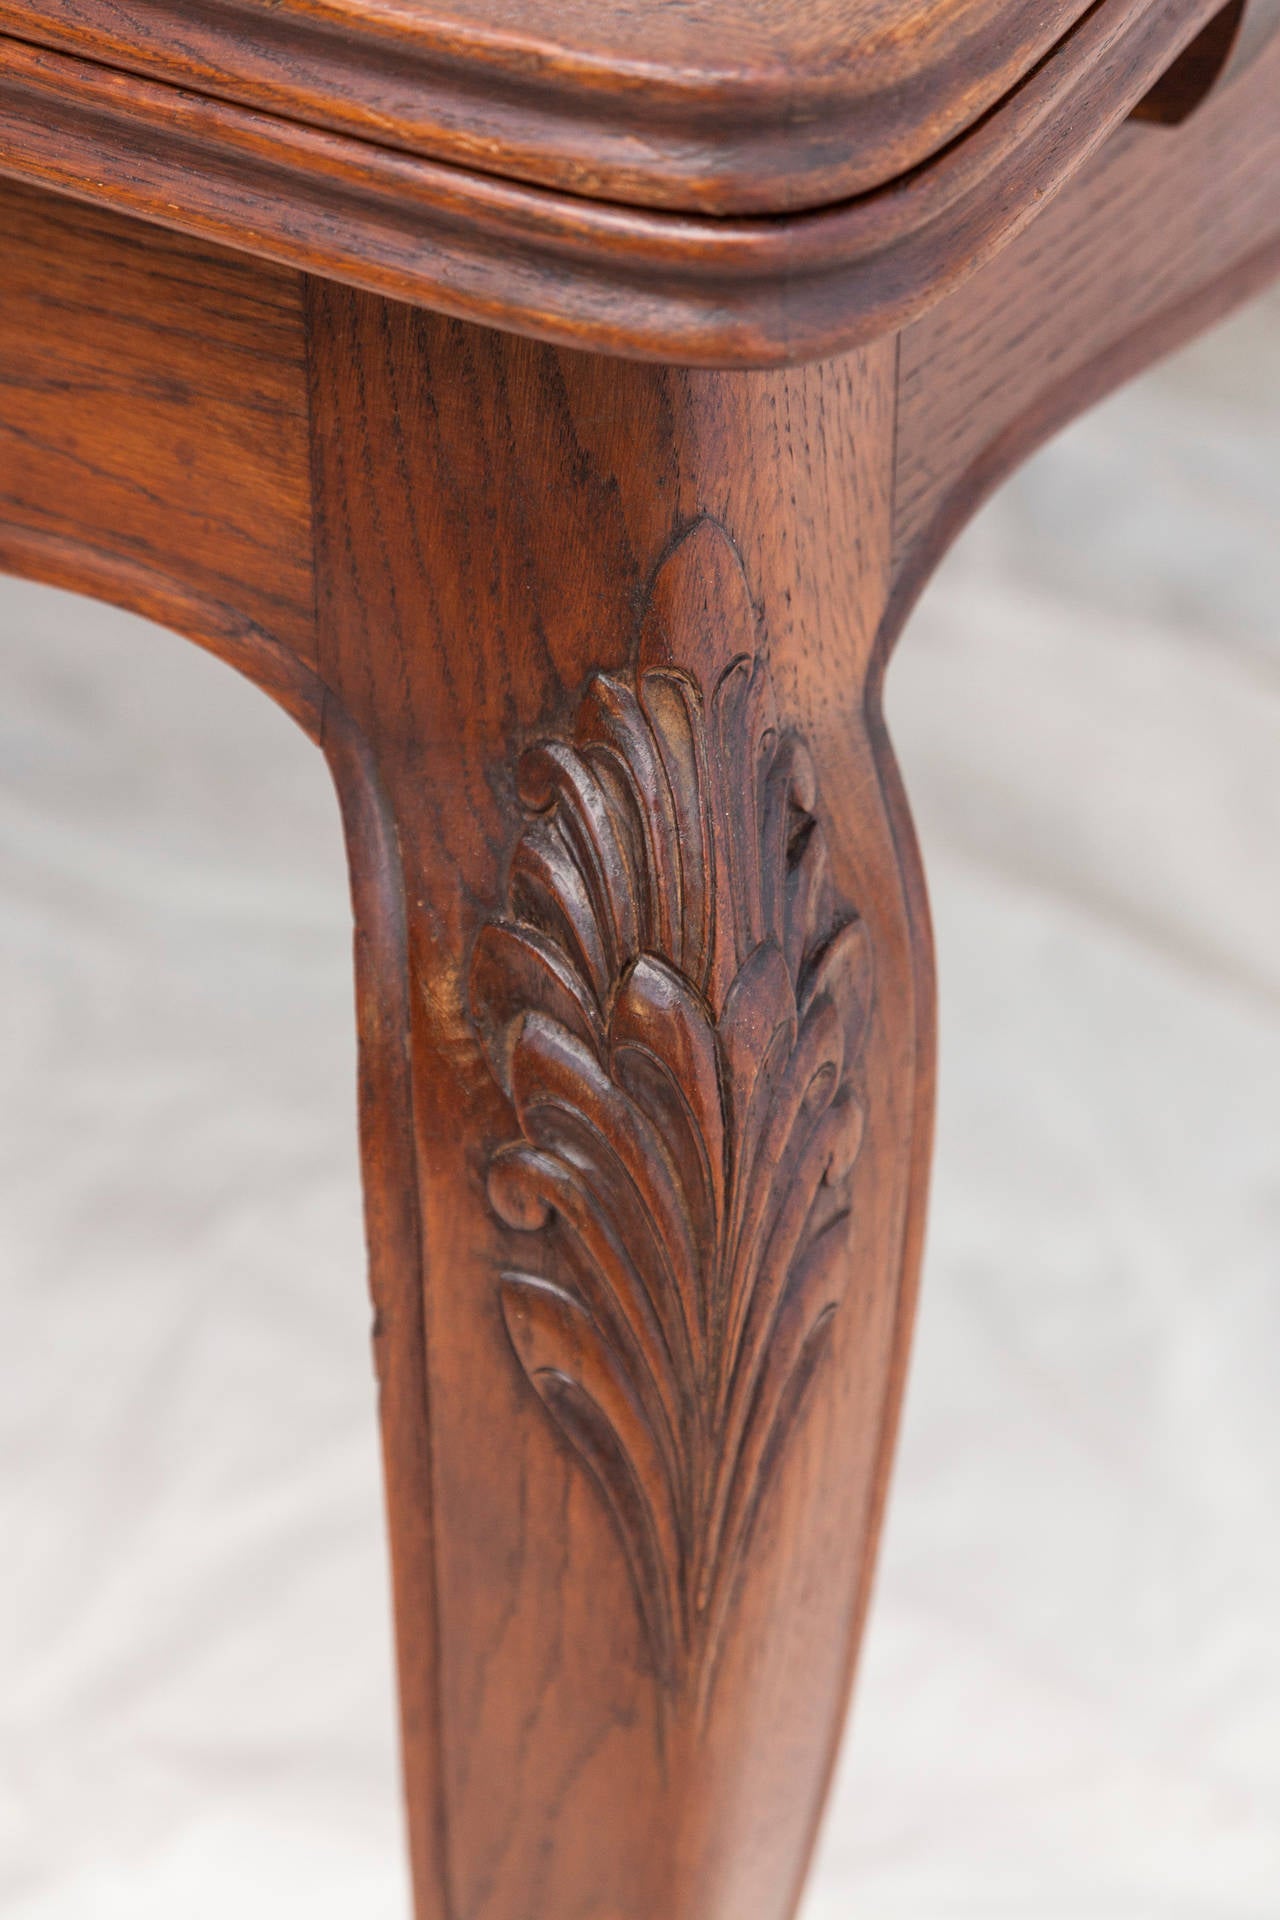 Hand-Carved French Draw-Leaf Table with Parquet Top and Beveled Edge 2